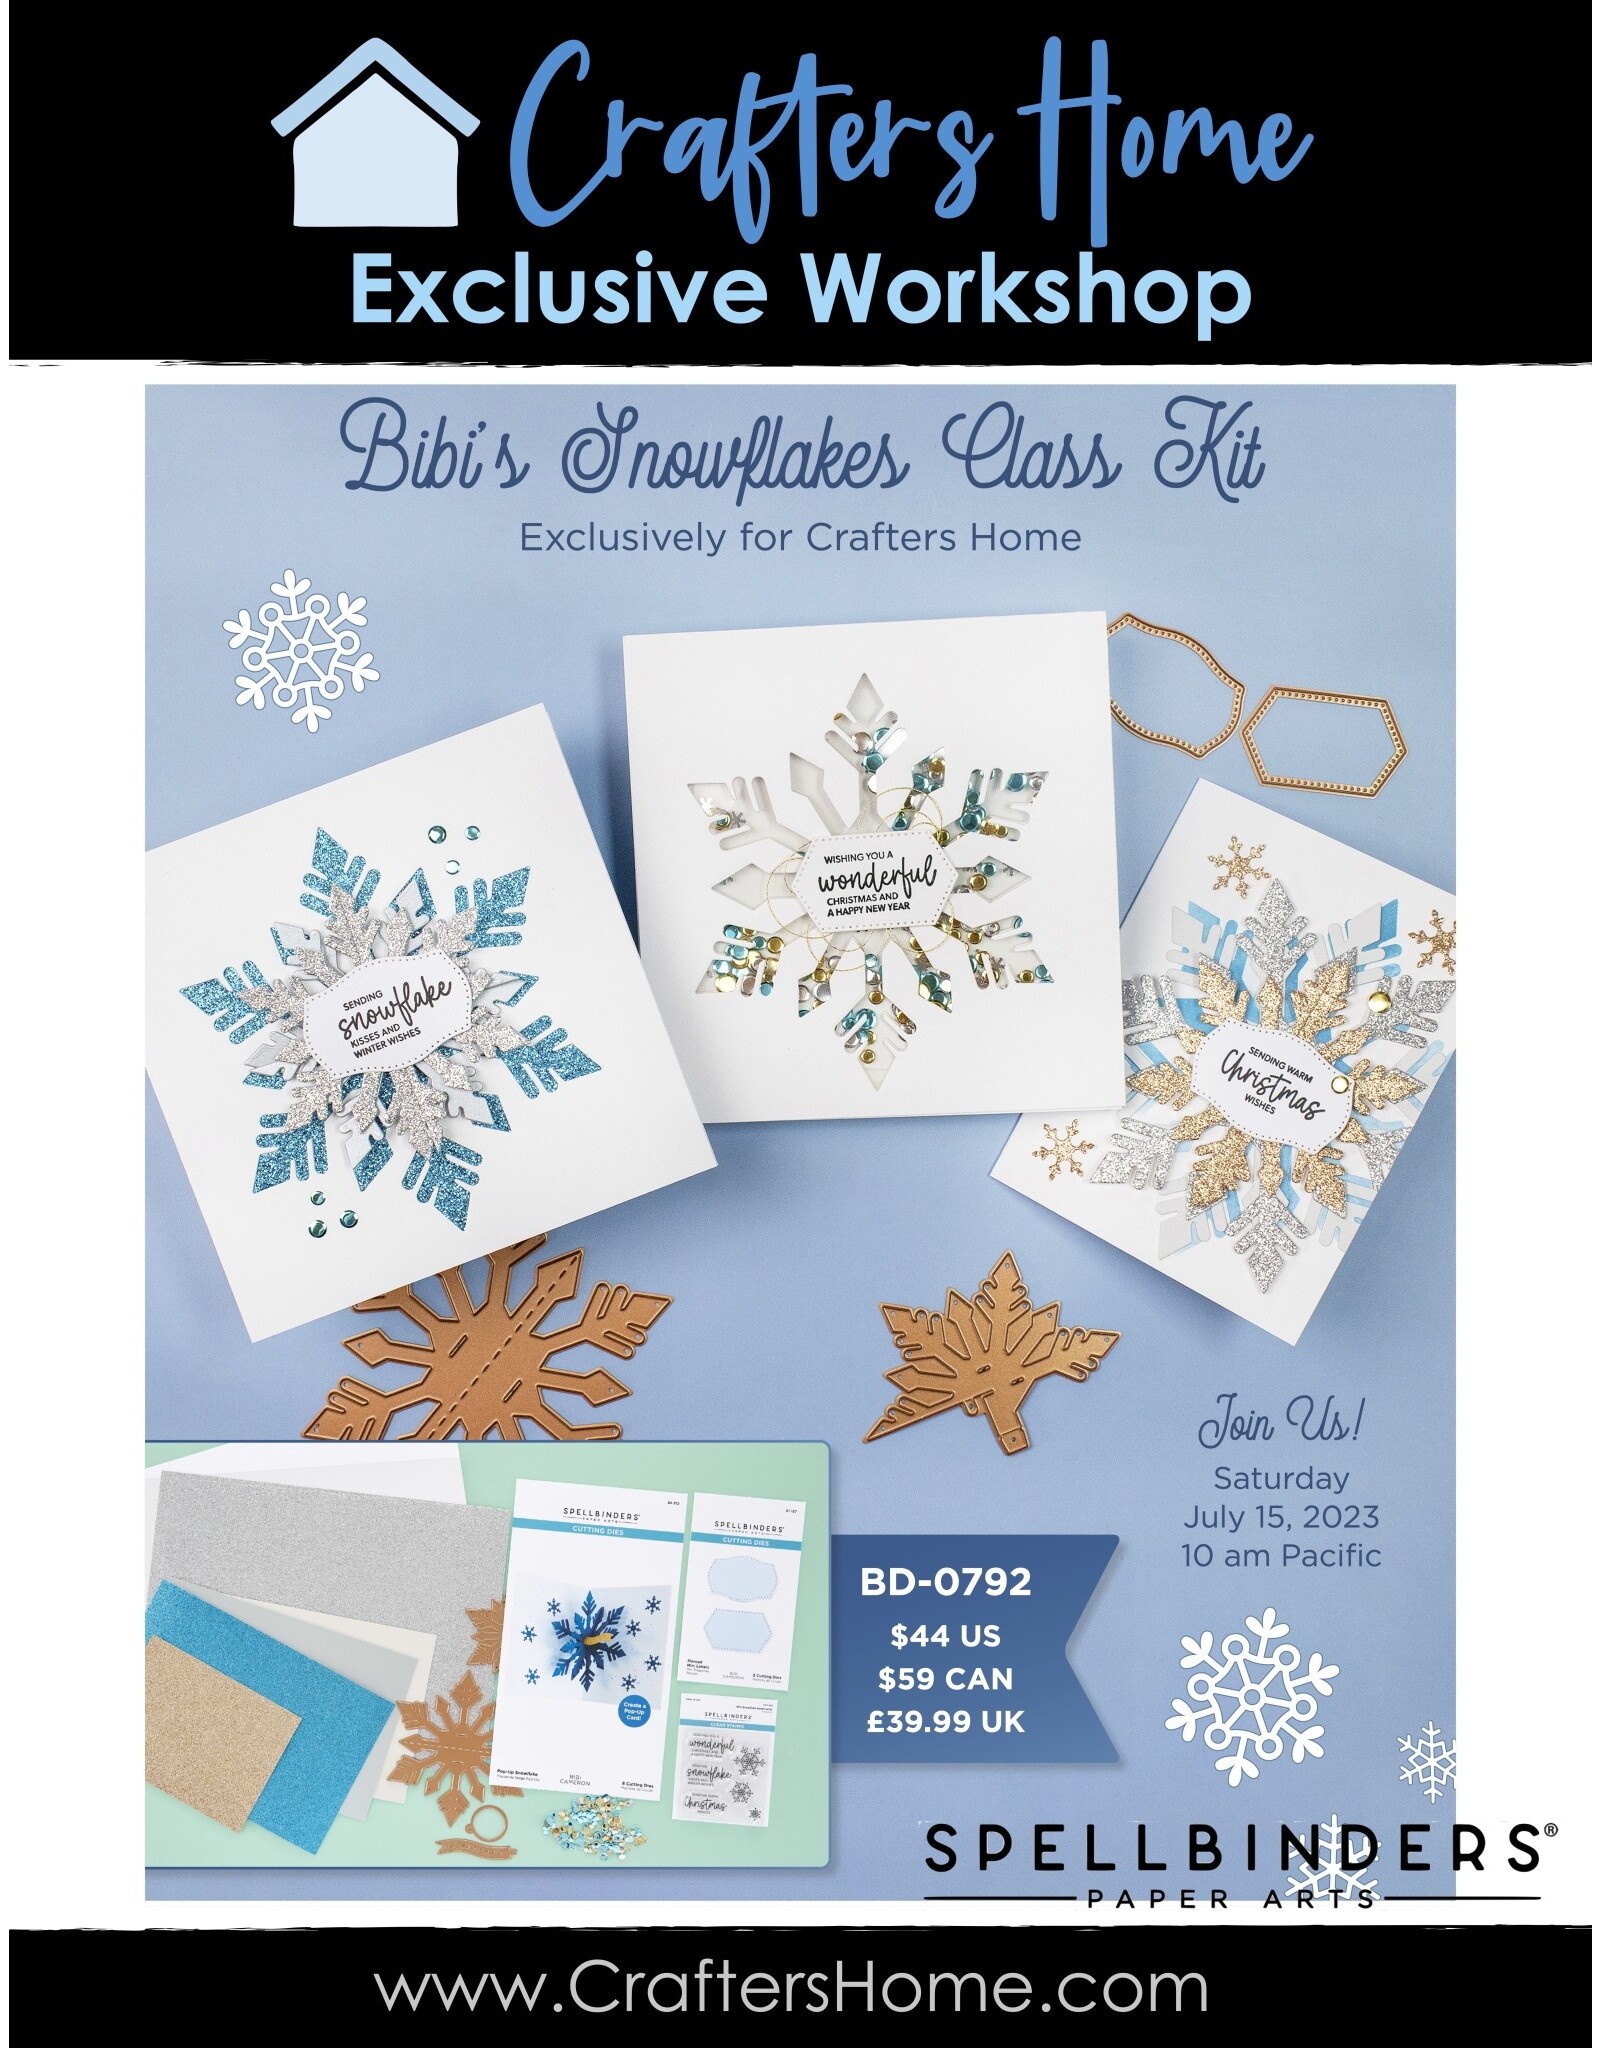 CRAFTERS HOME SPELLBINDERS CRAFTERS HOME BIBI'S SNOWFLAKES ON-LINE CLASS